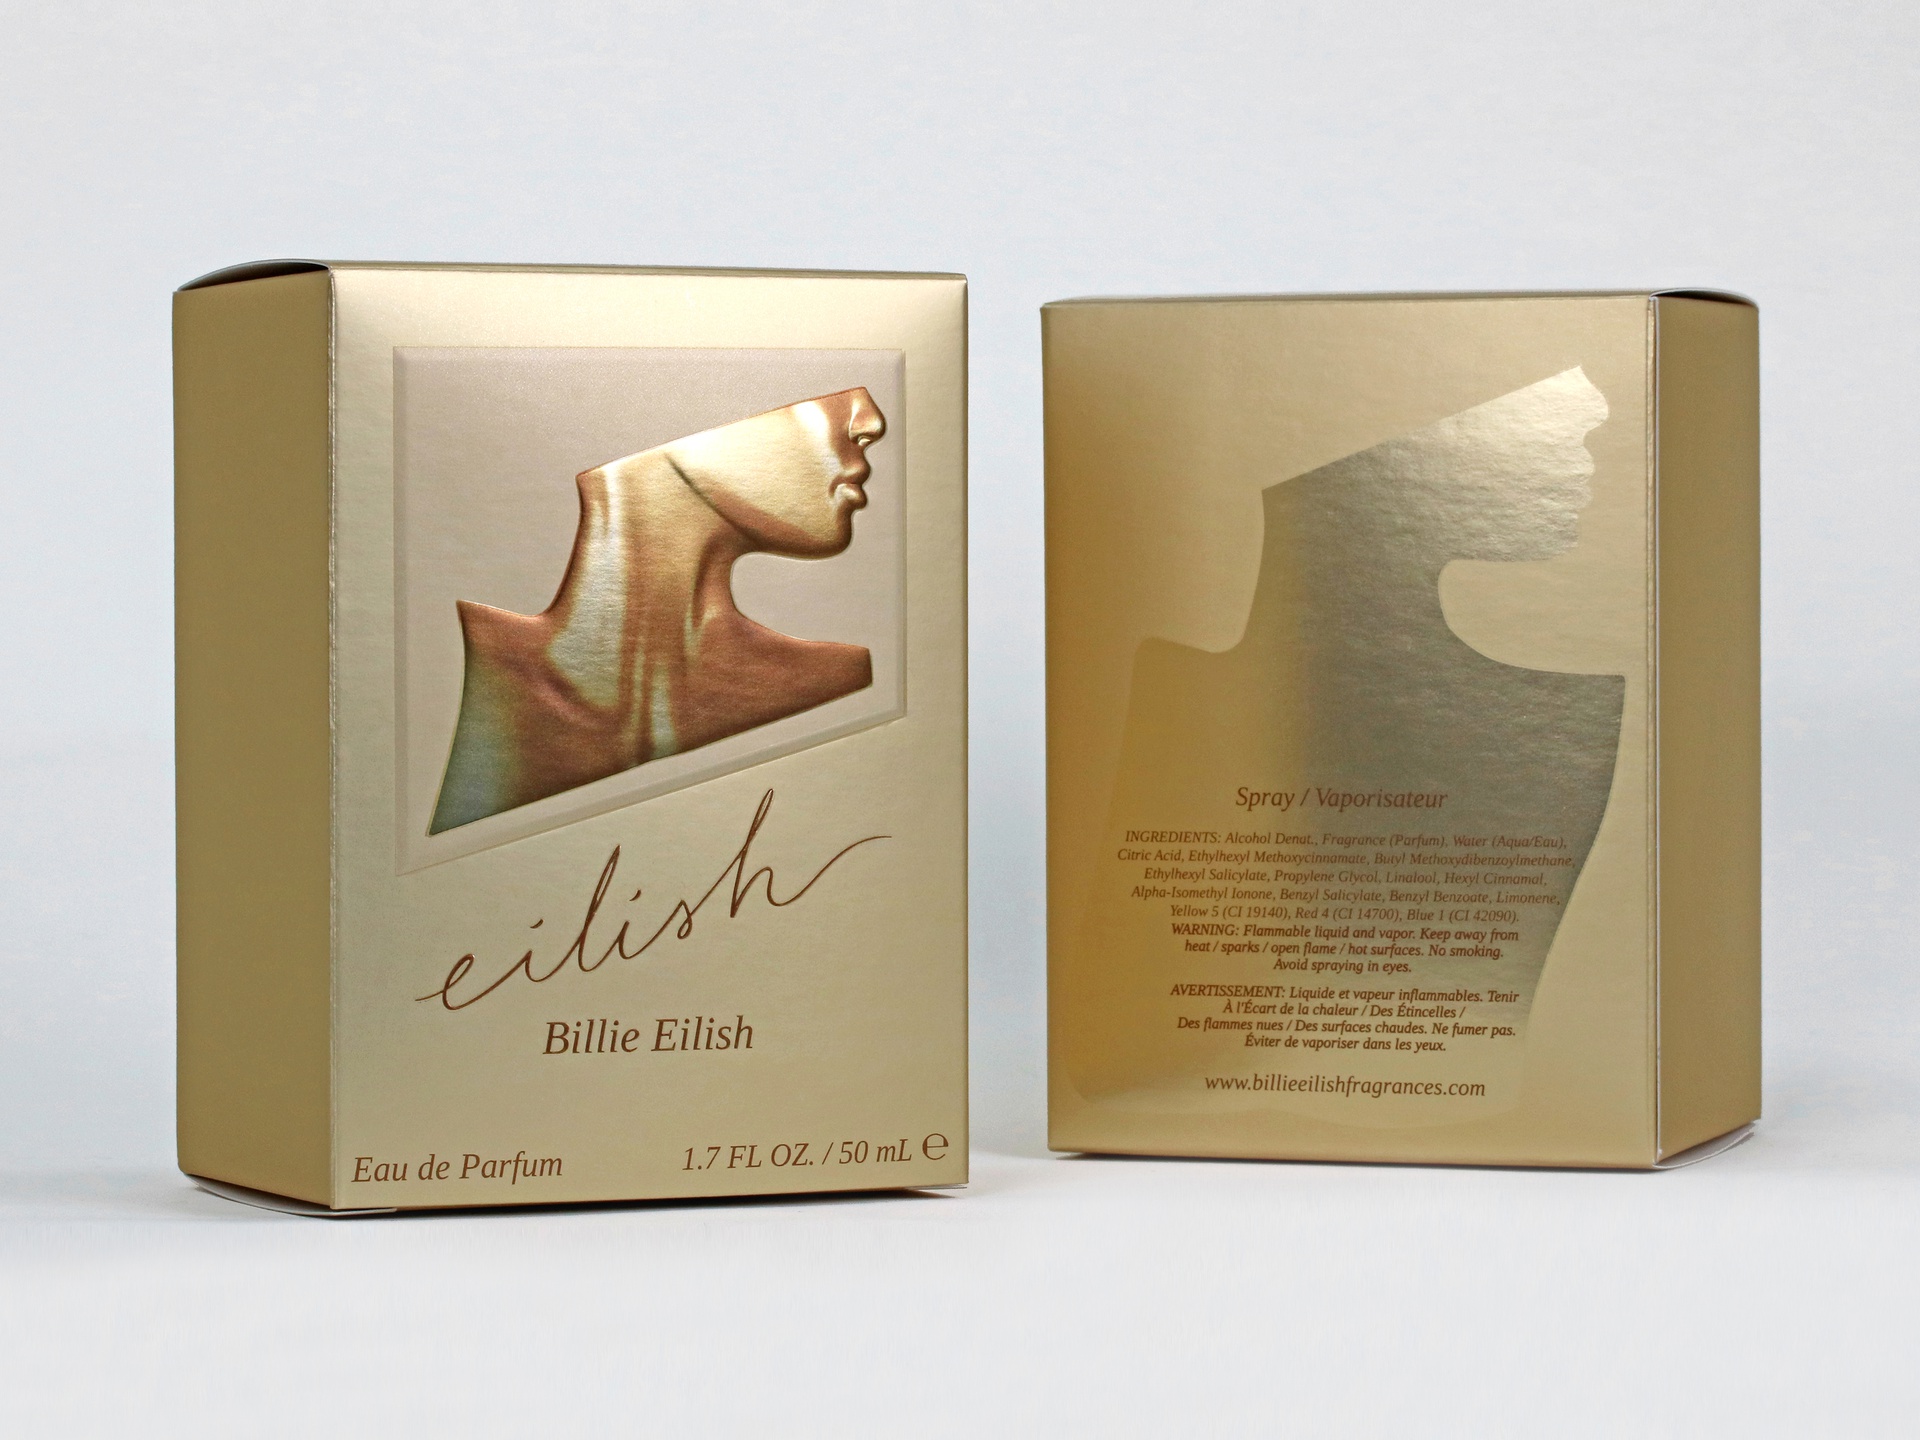 Billie Eilish packaging features soft touch coating, multi-level embossing, and Envirofoil®